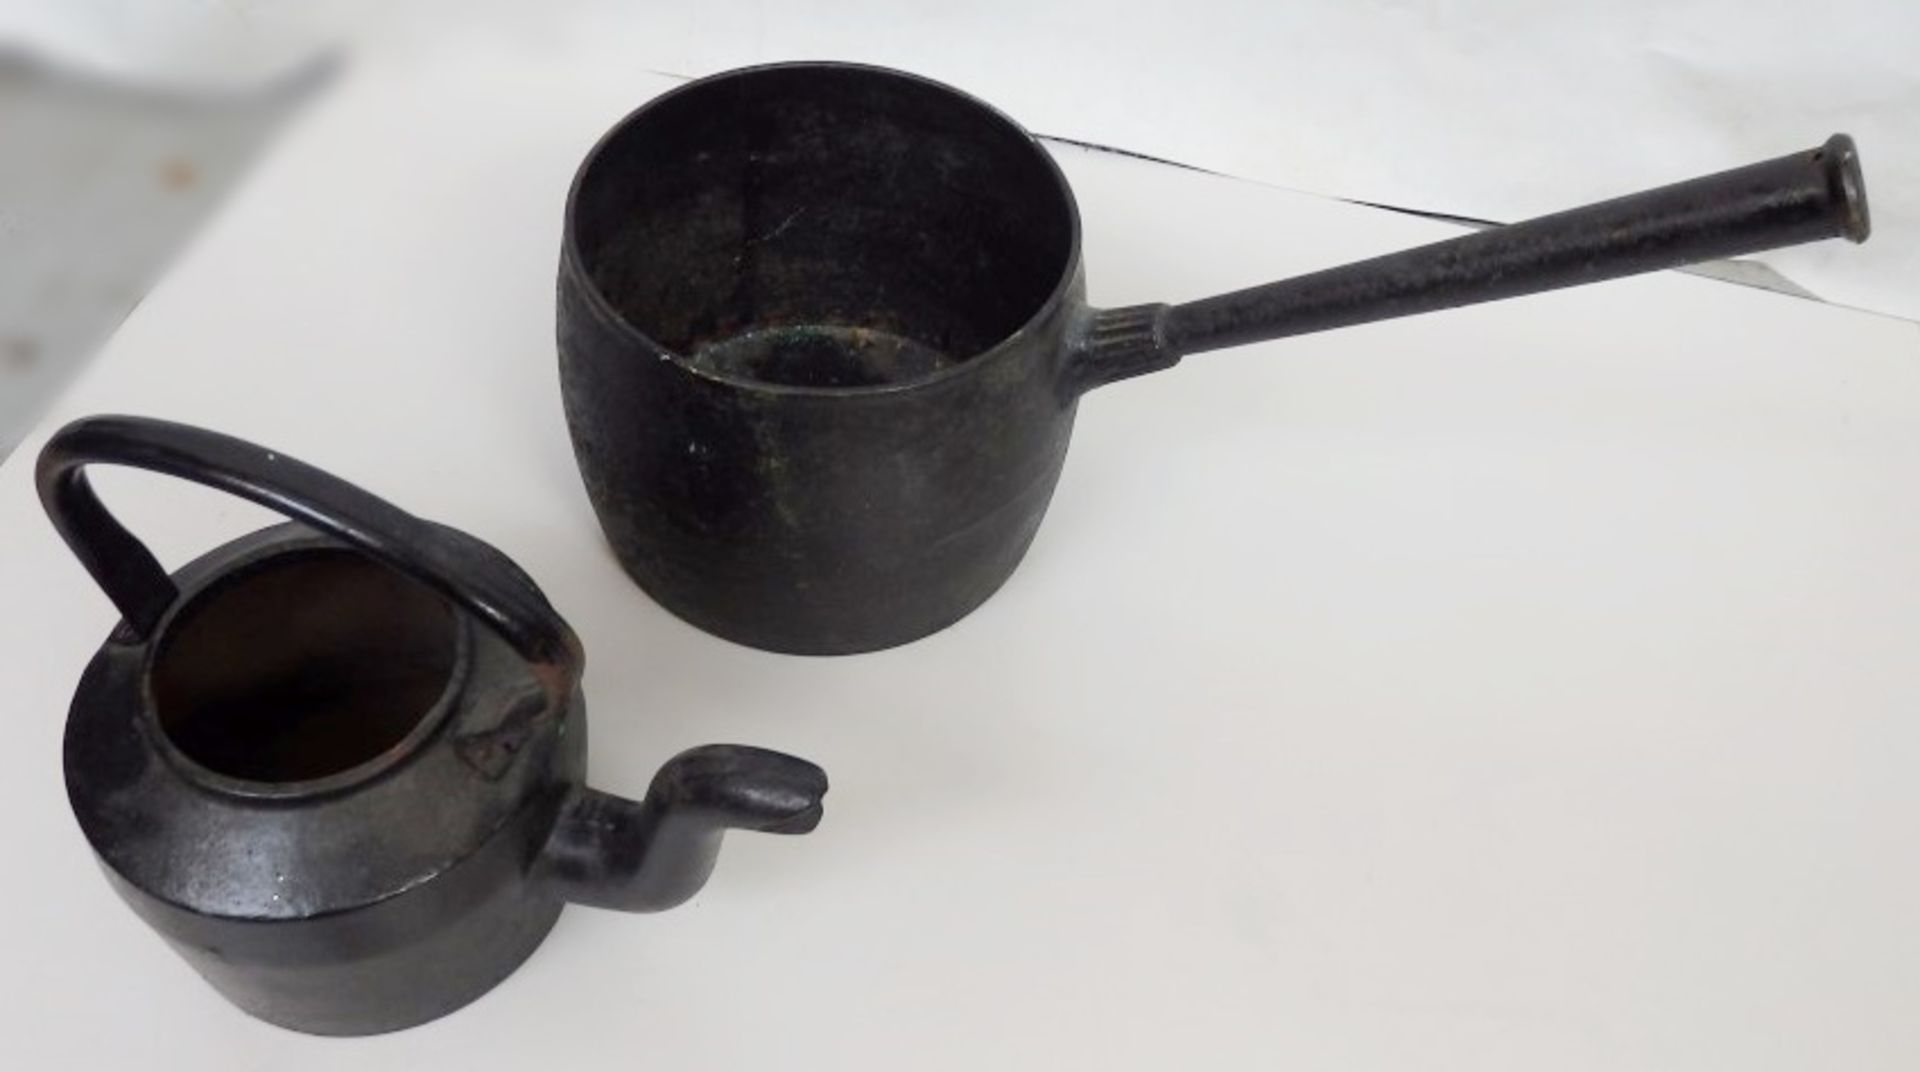 2 x Items Or Antique Kitchenware - Includes Kettle & Long-armed Pan - Both Very Heavy, Sturdy - Image 2 of 3